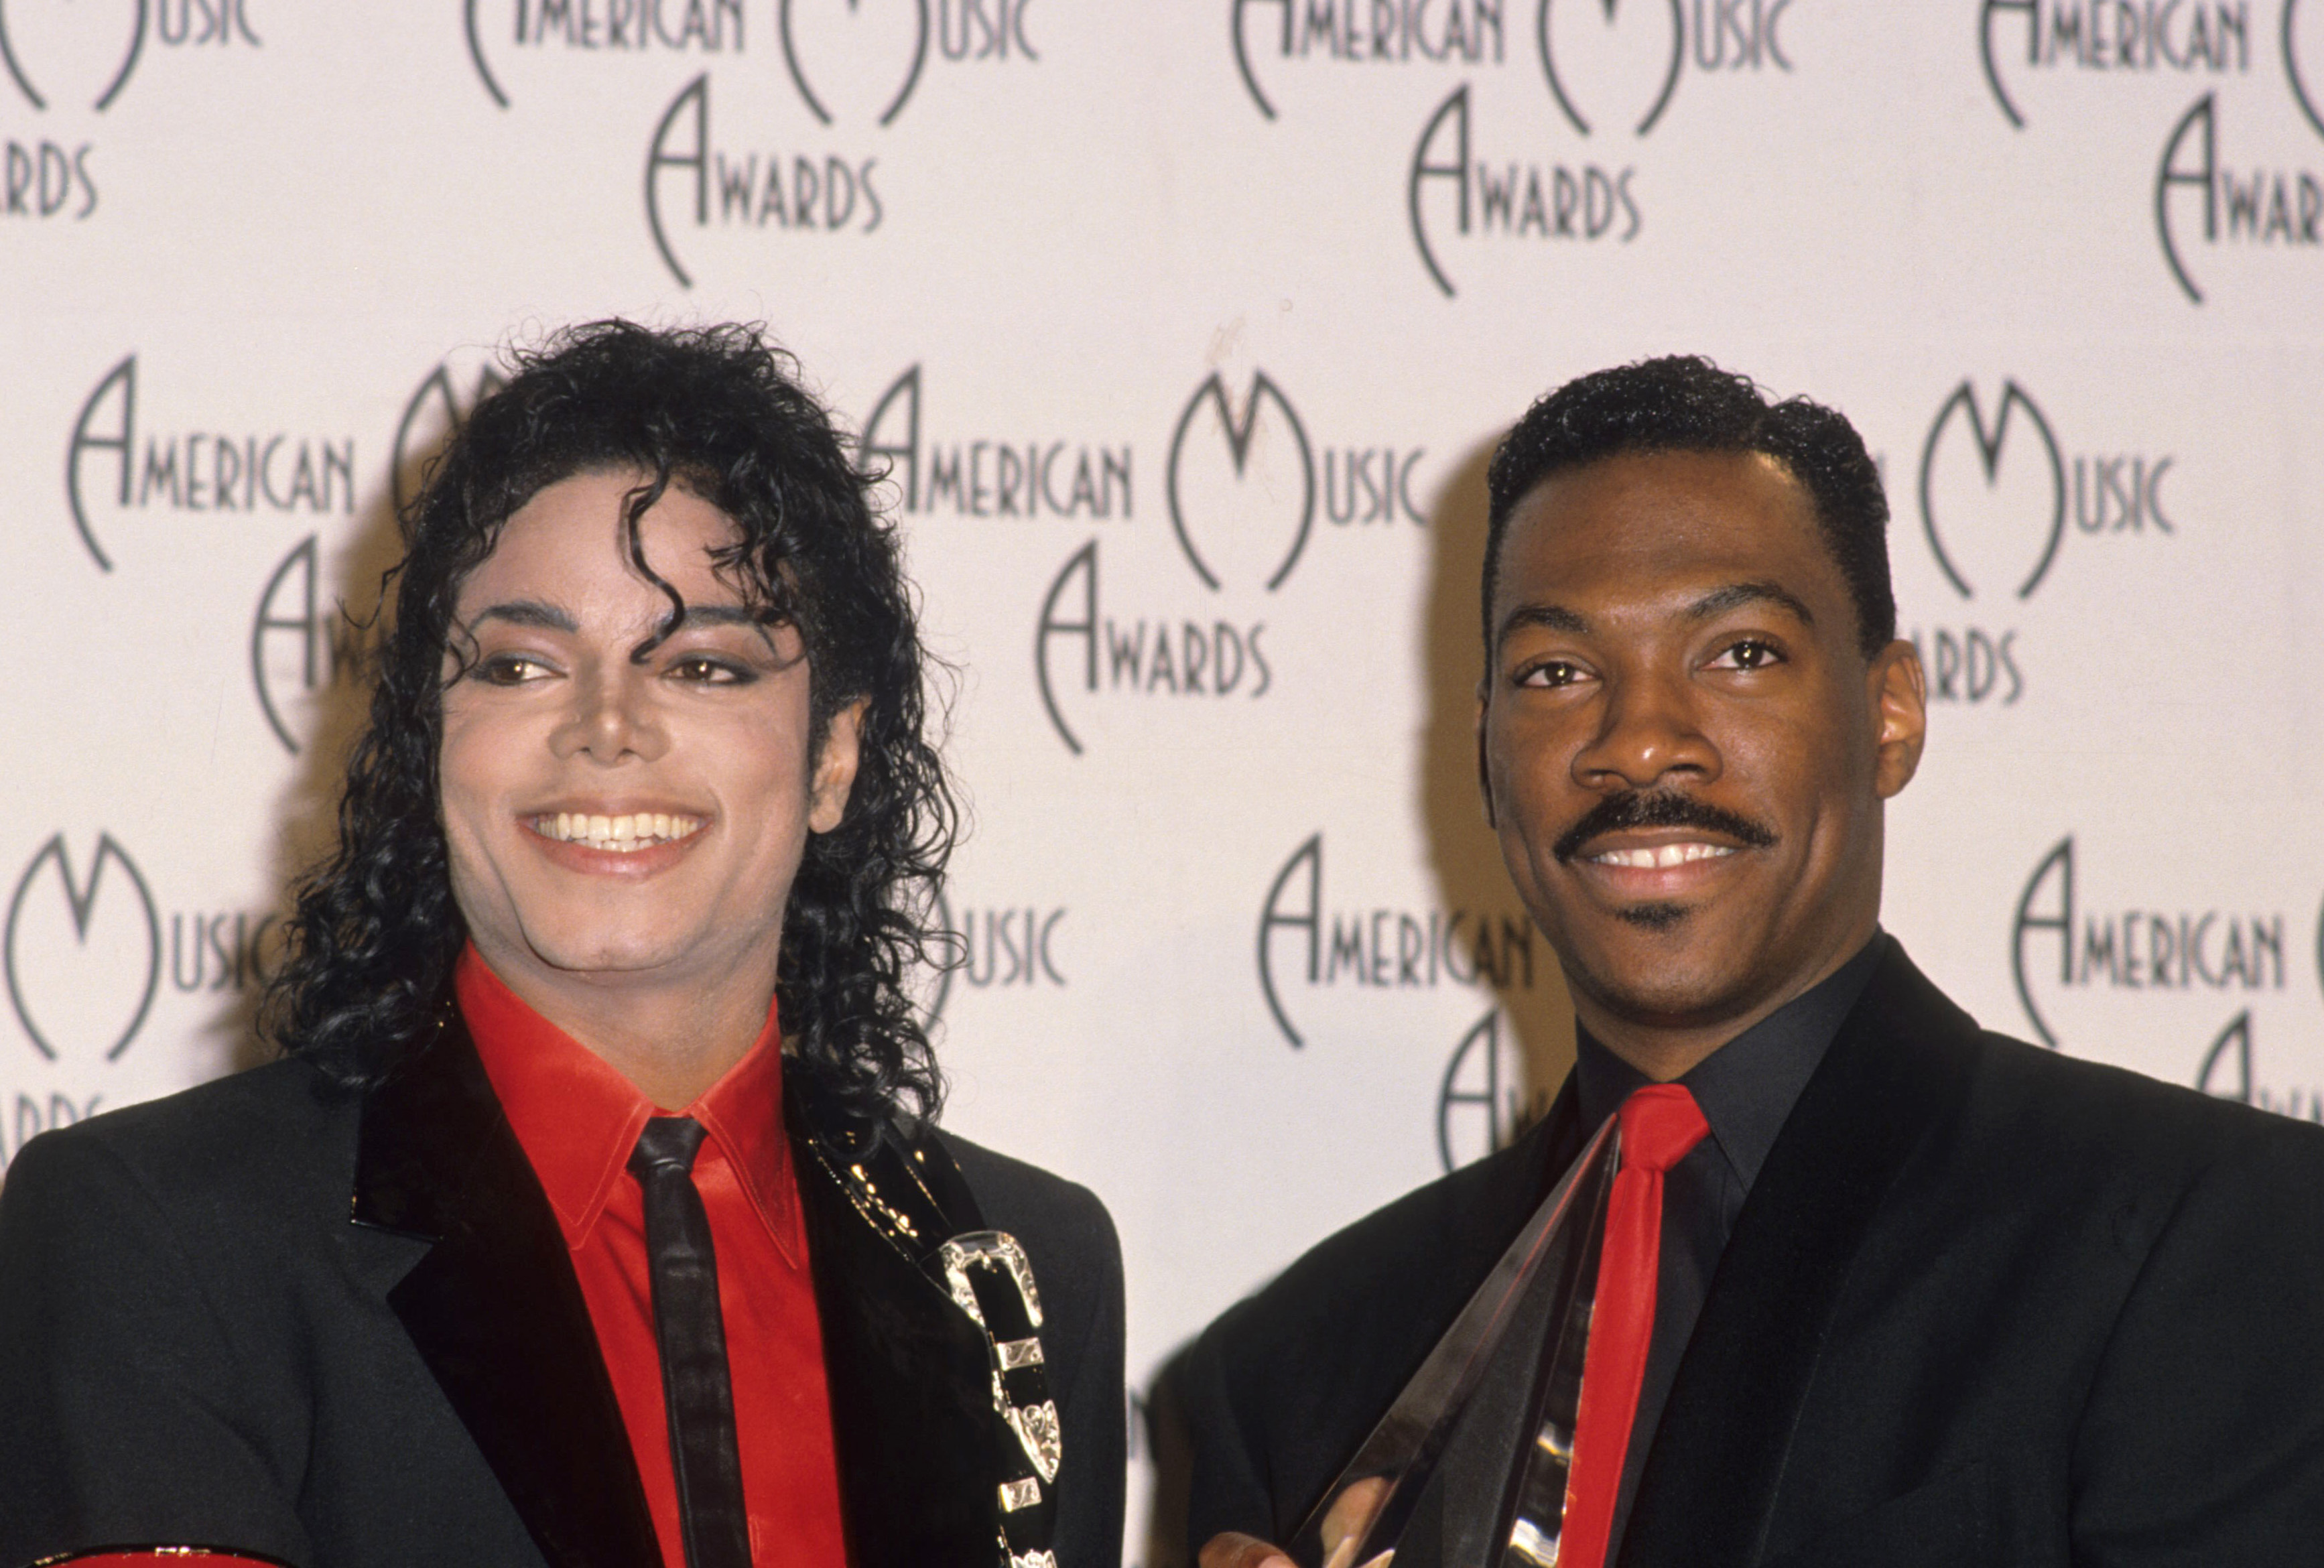 Throwback: Michael Jackson’s ‘Remember the Time’ Video Was Packed With A-Listers